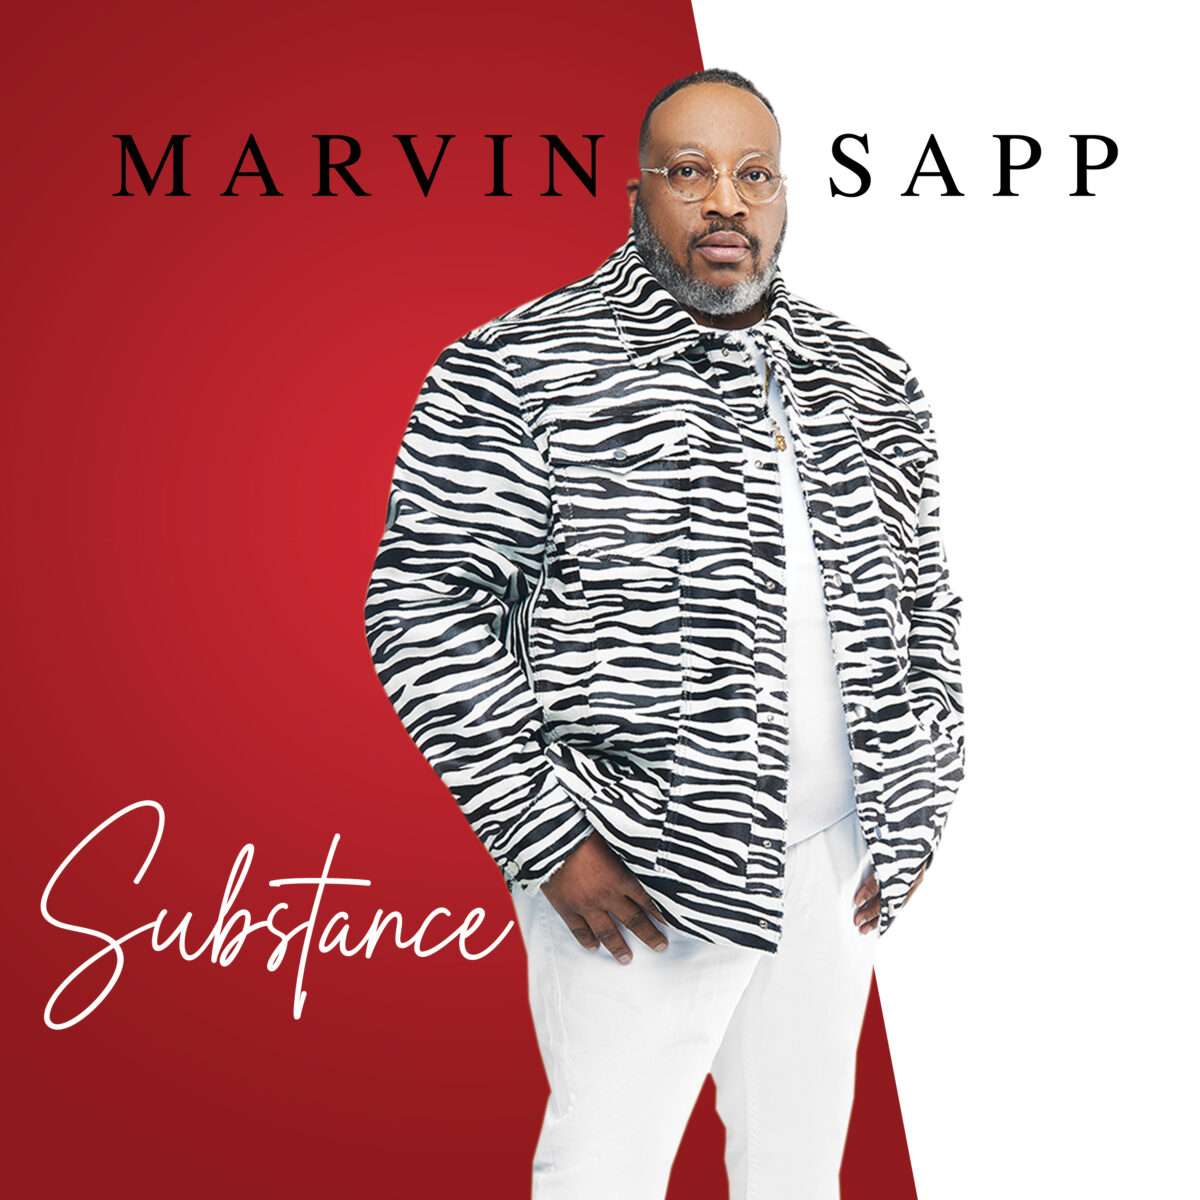 marvin-sapp-gets-ready-to-release-“substance”!-pre-order-today!